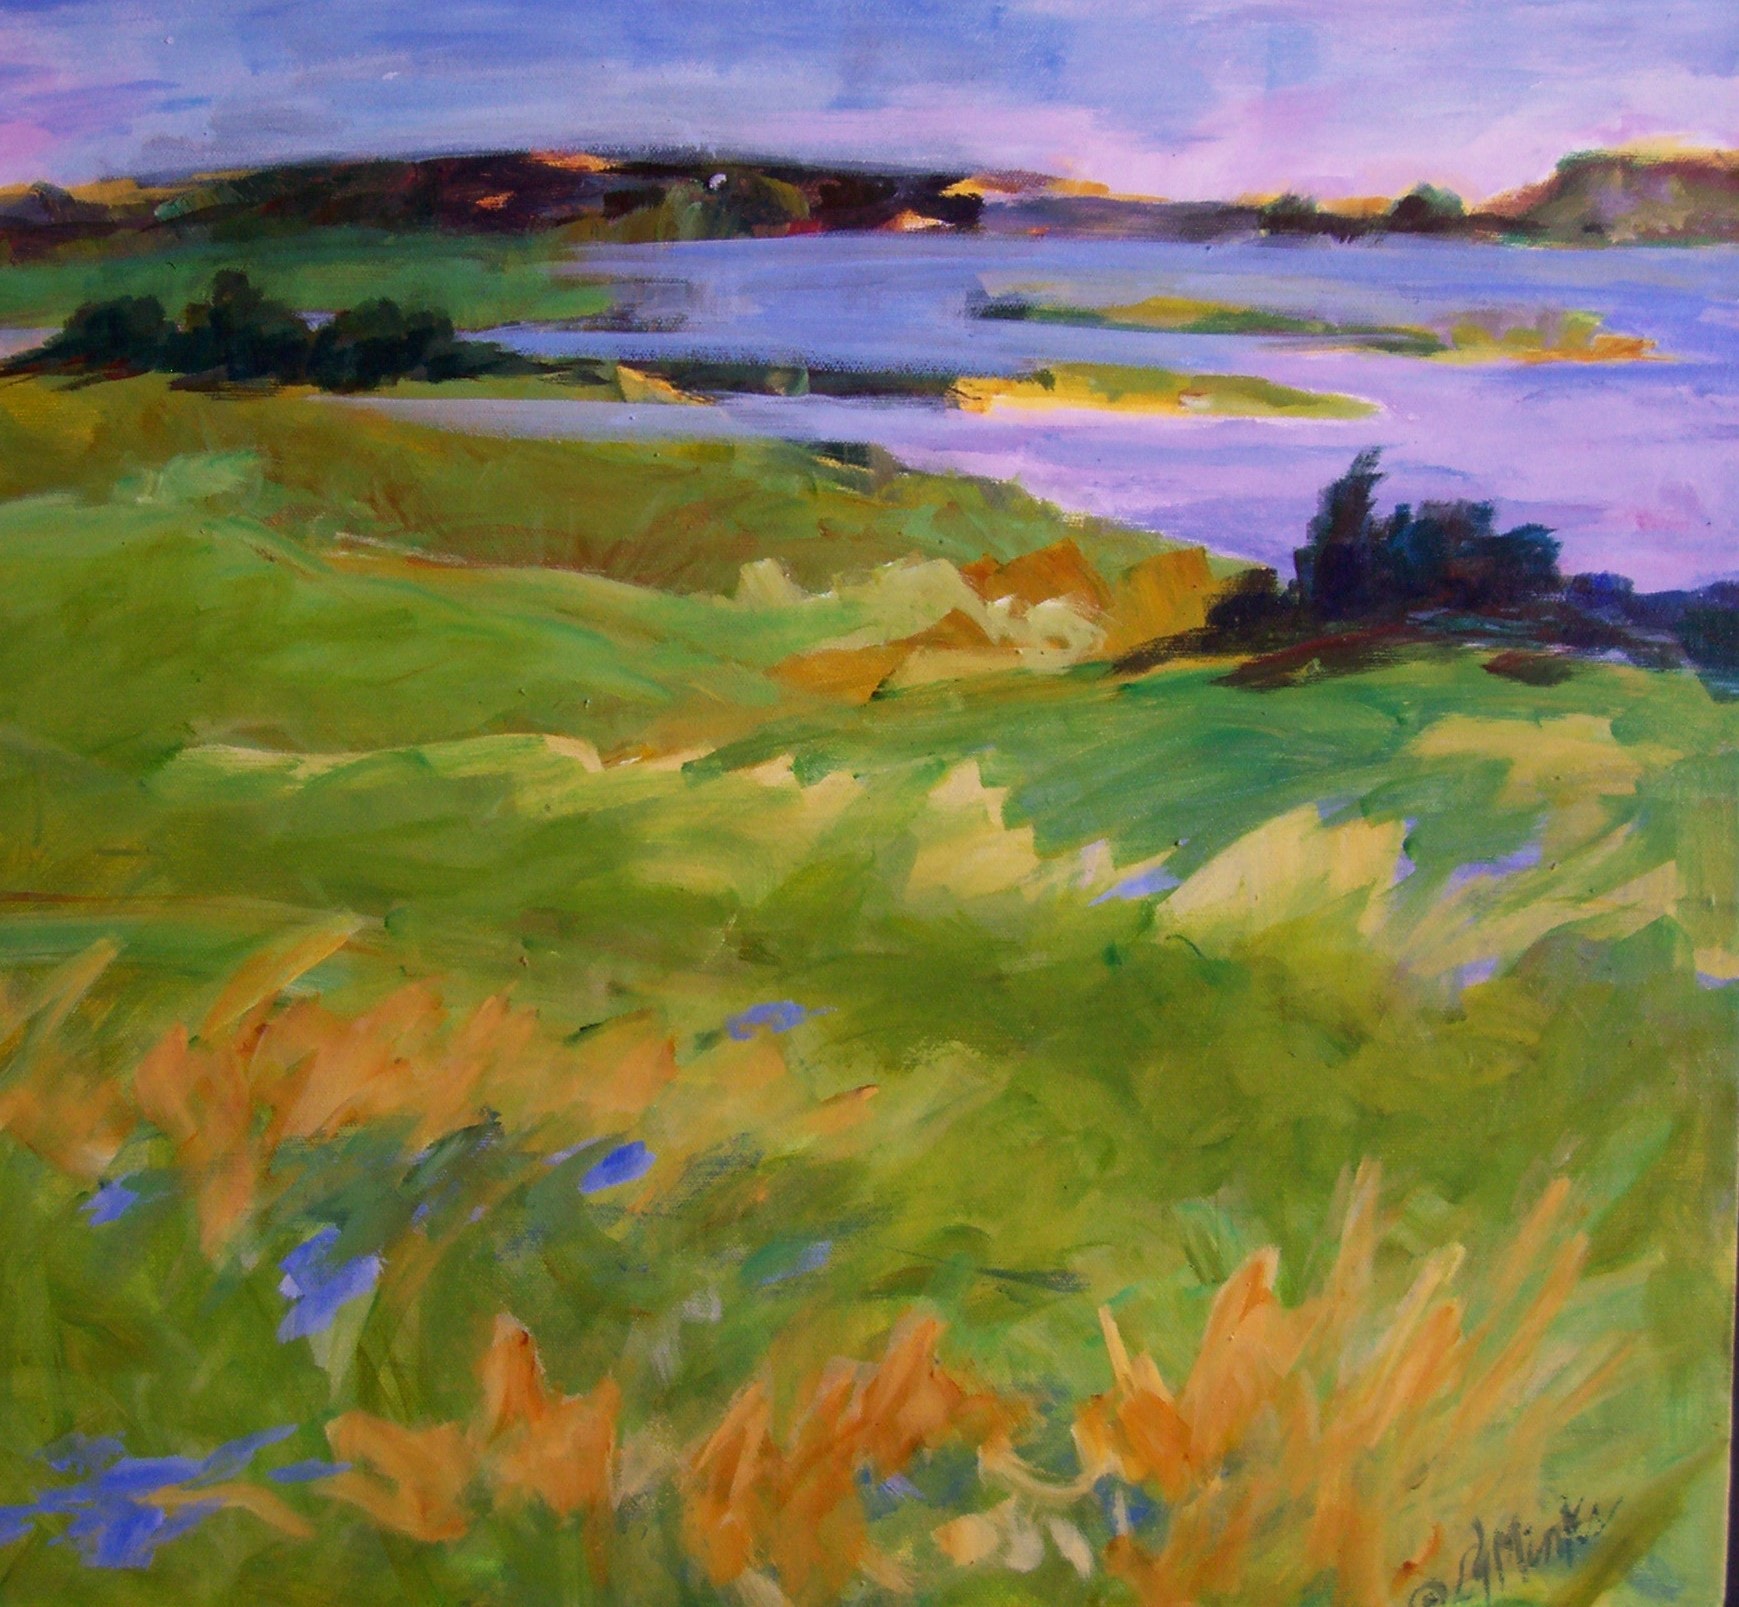 A painting of grass blown in the wind and a large river